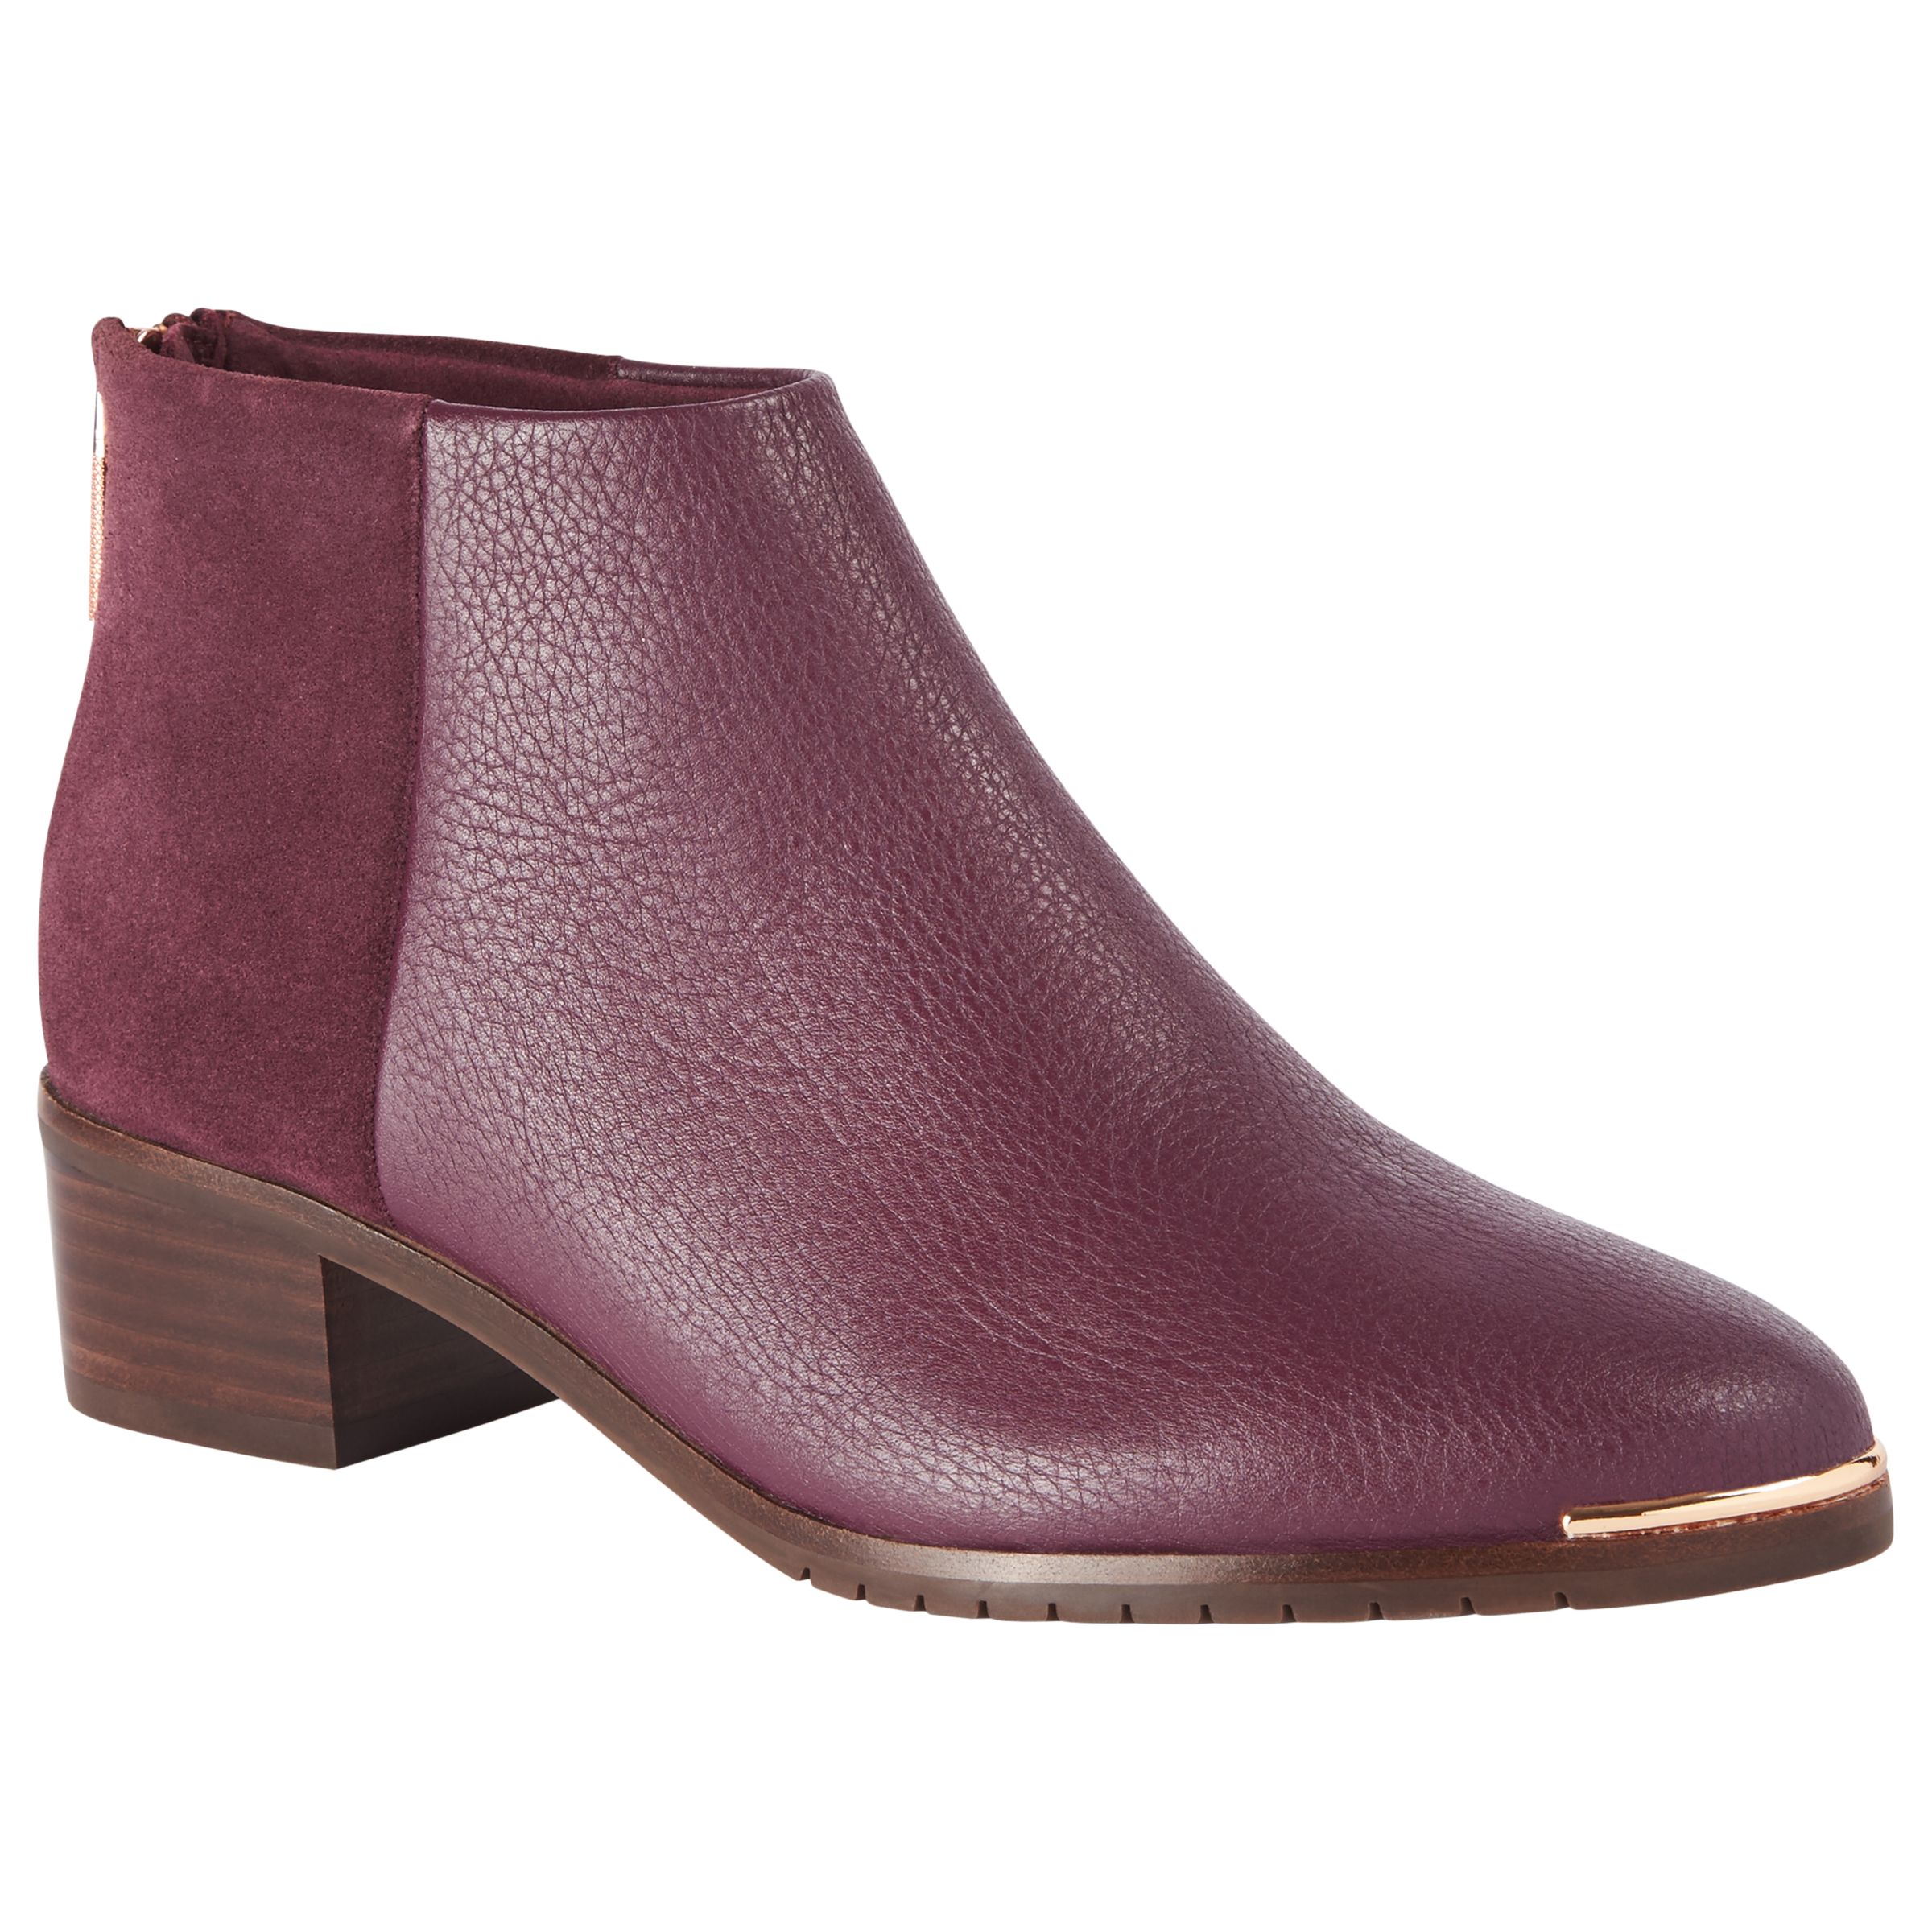 Ted Baker Sasybell Faux Fur Lined Block Heel Ankle Boots, Burgundy, 4